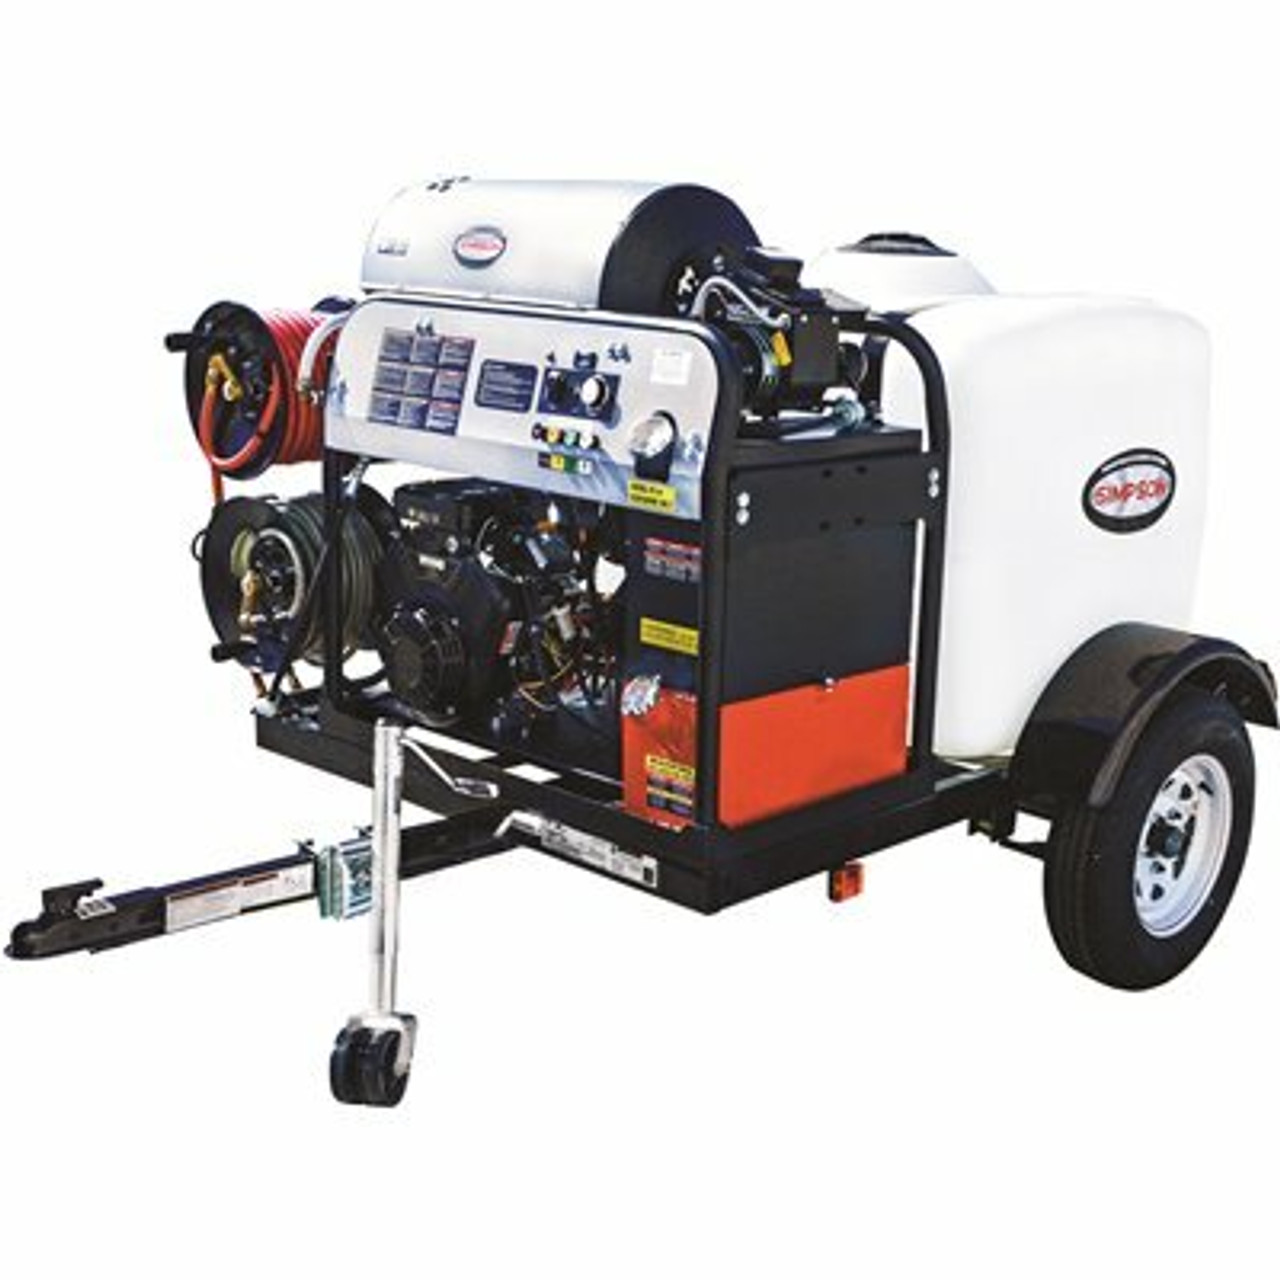 Simpson 95006 4000 Psi At 4.0 Gpm Vanguard V-Twin Hot Water Professional Gas Pressure Washer Trailer